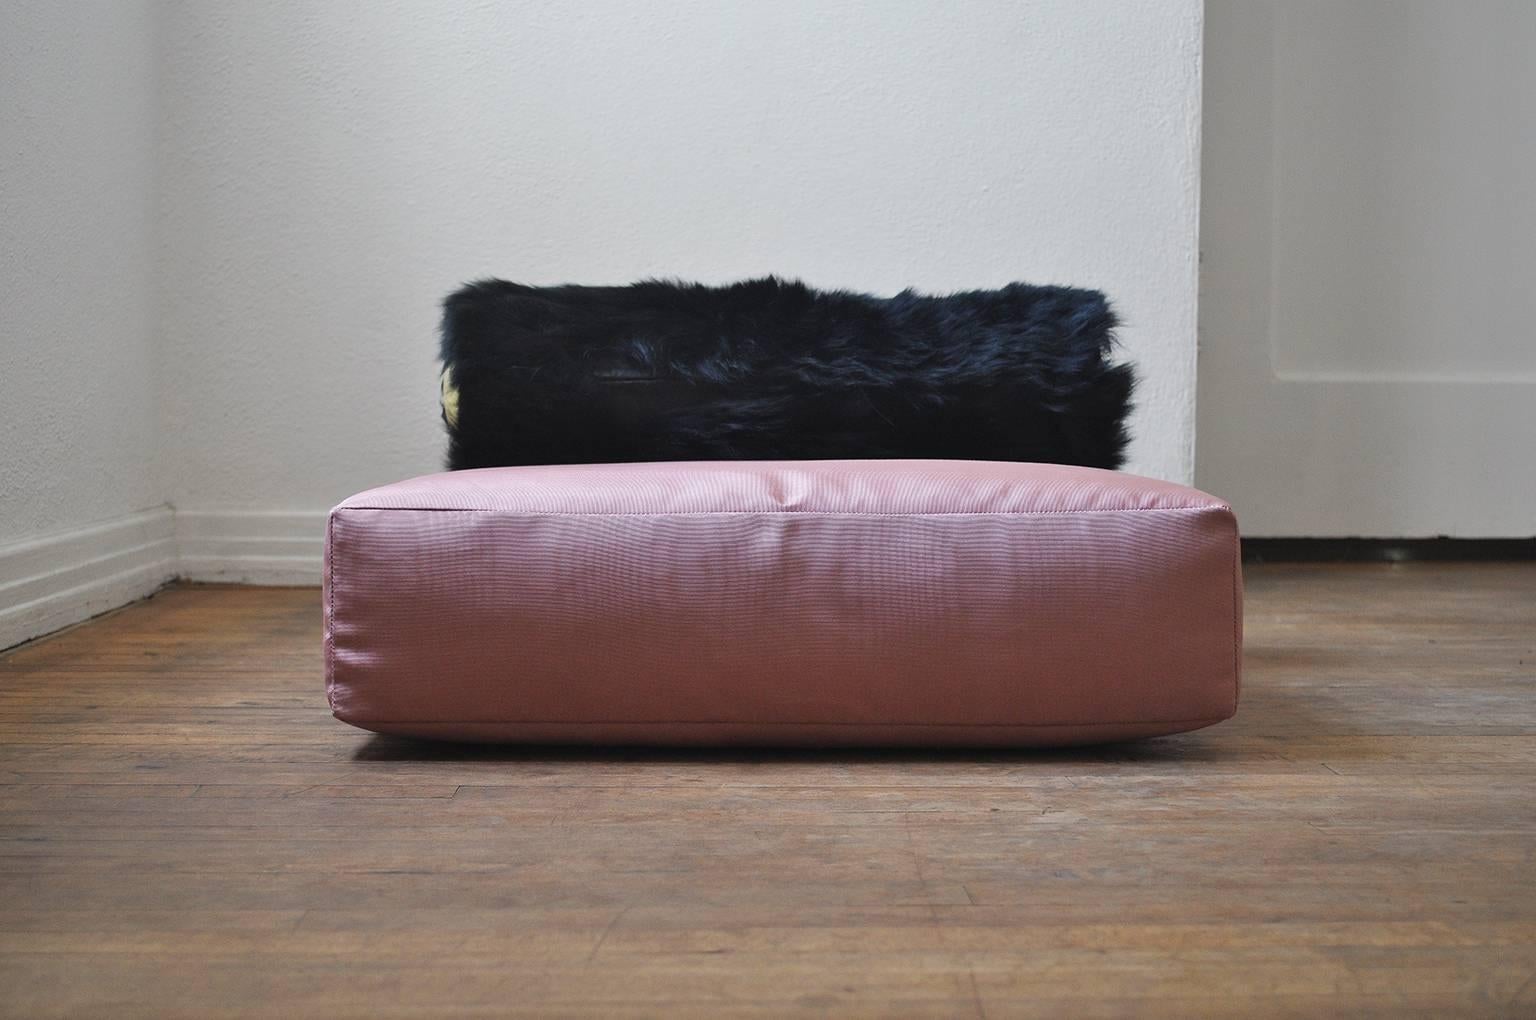 Yaoska Davila’s floor cushions are functional and elegant. Inspired by the opulence of the 1920s and 1930s. Designed for intimate adventures that occur on the floor. Each set is one of a kind just like you. Bolster sits separately from the cushion